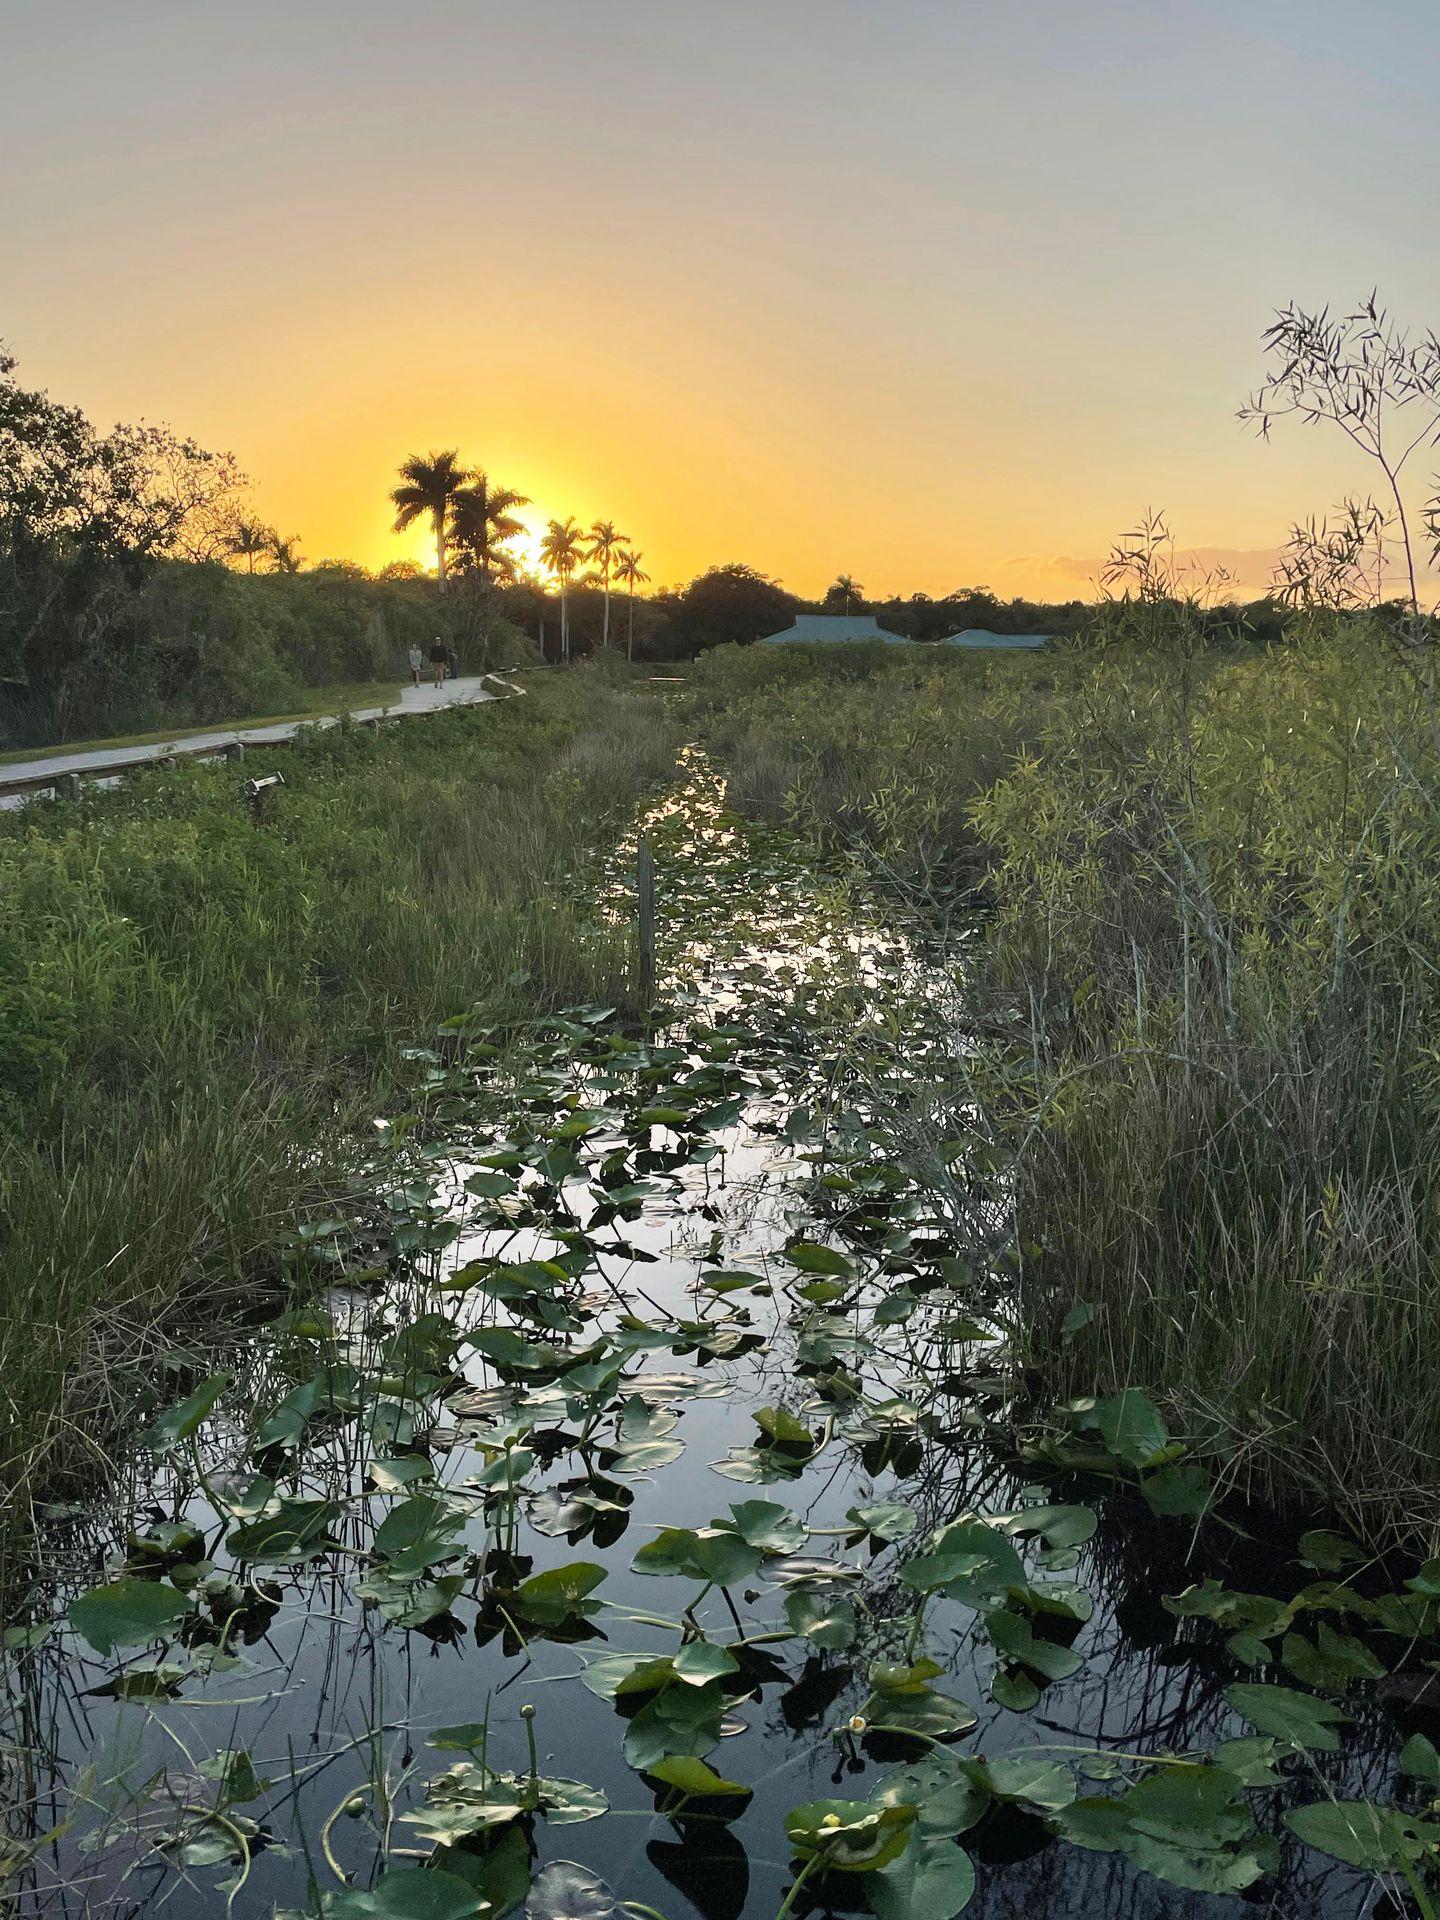 The sun setting over water and behind some palm trees on the Anhinga trail.